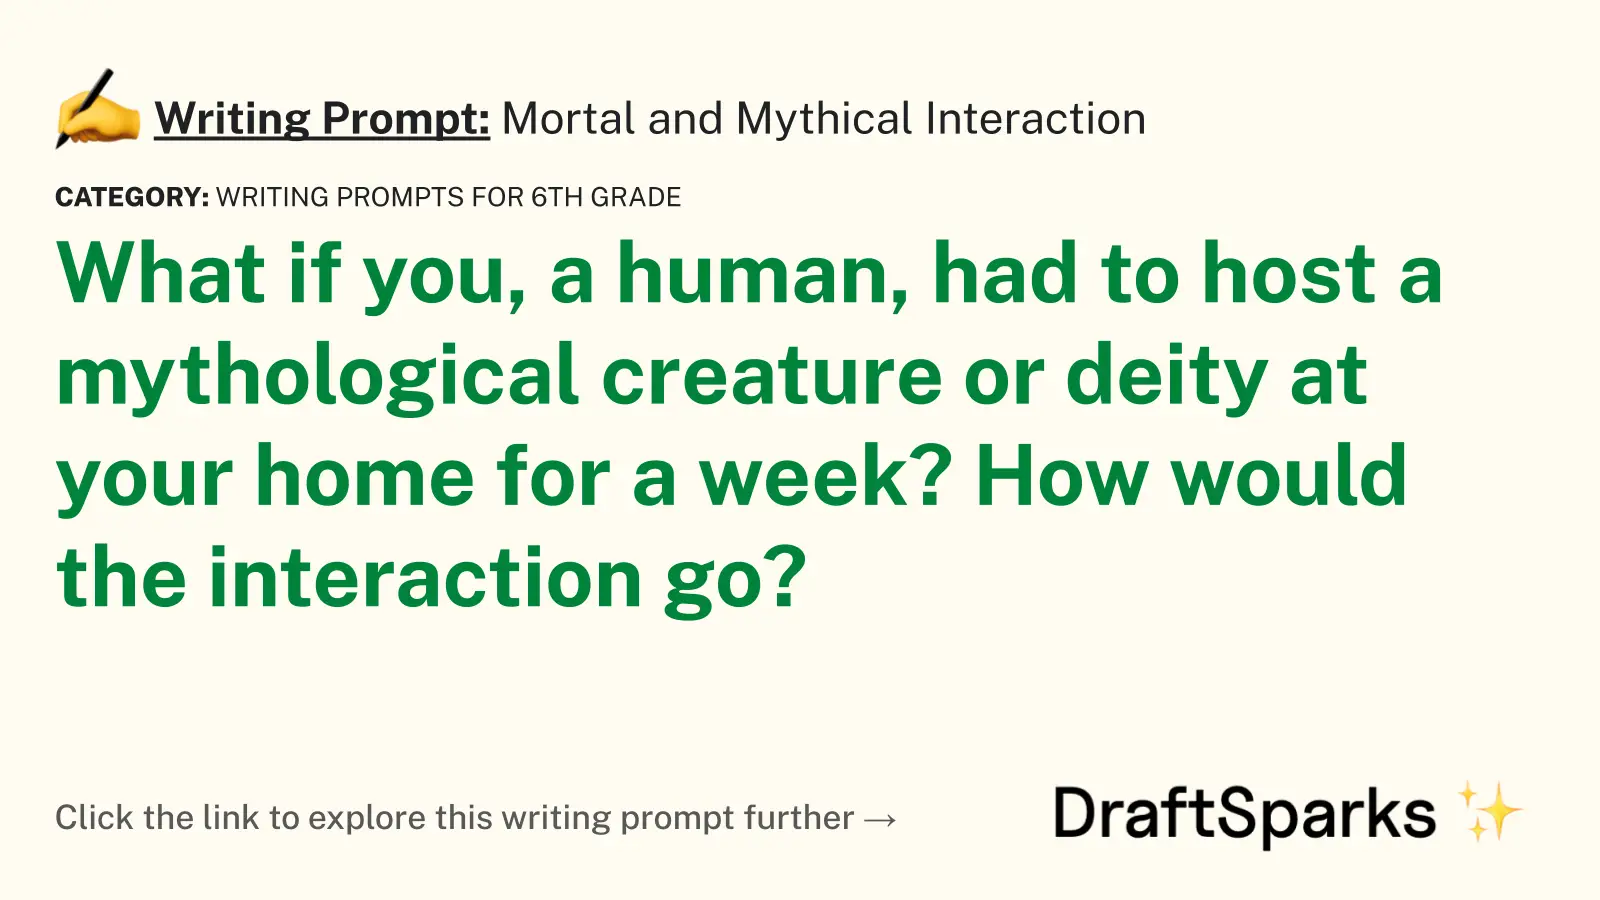 Mortal and Mythical Interaction